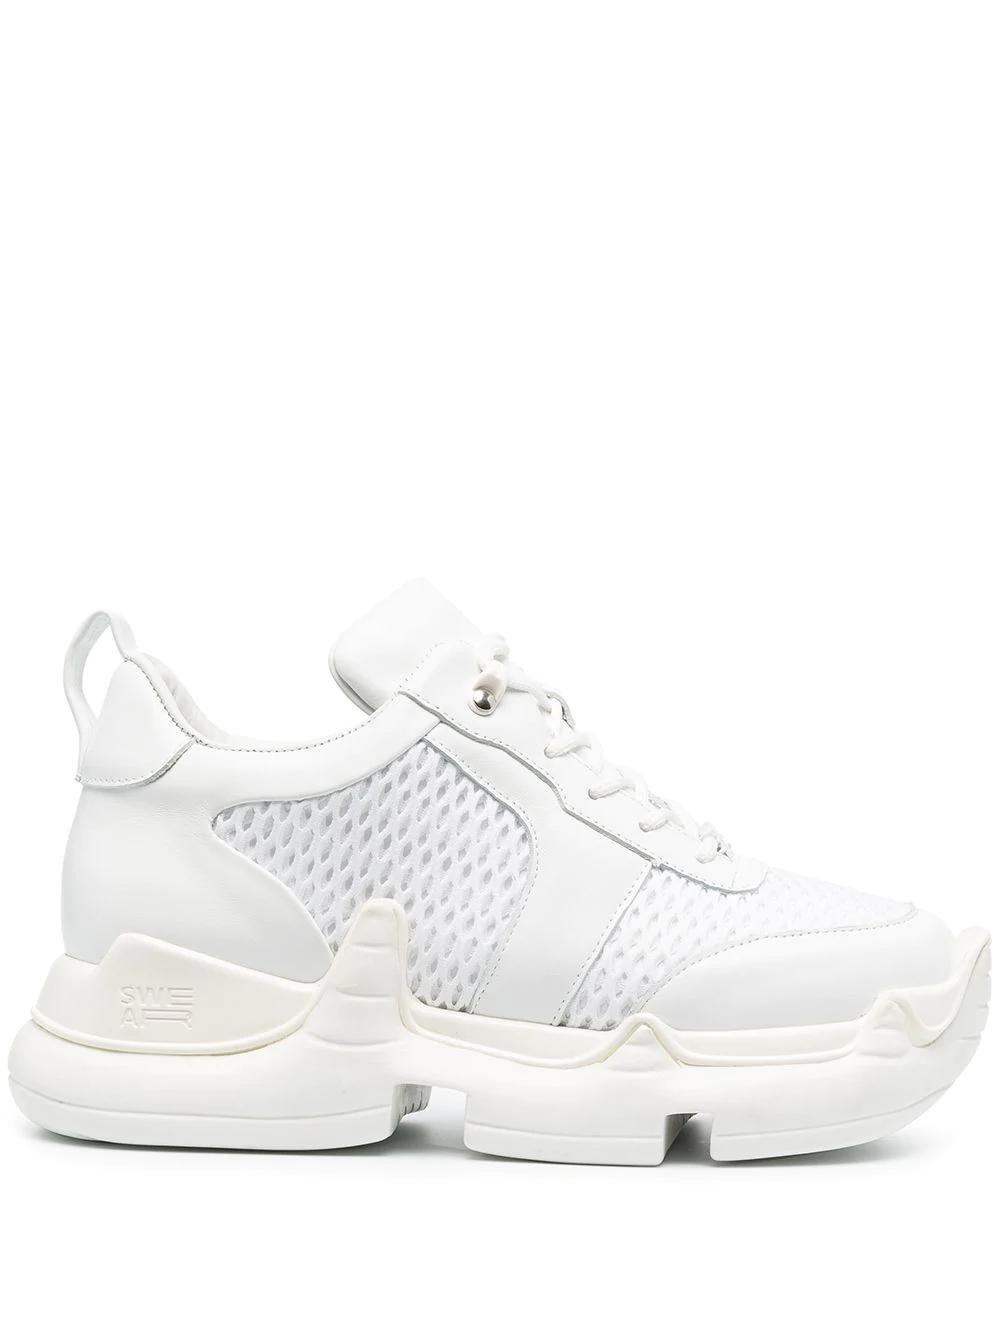 SWEAR Air Revive sneakers - White